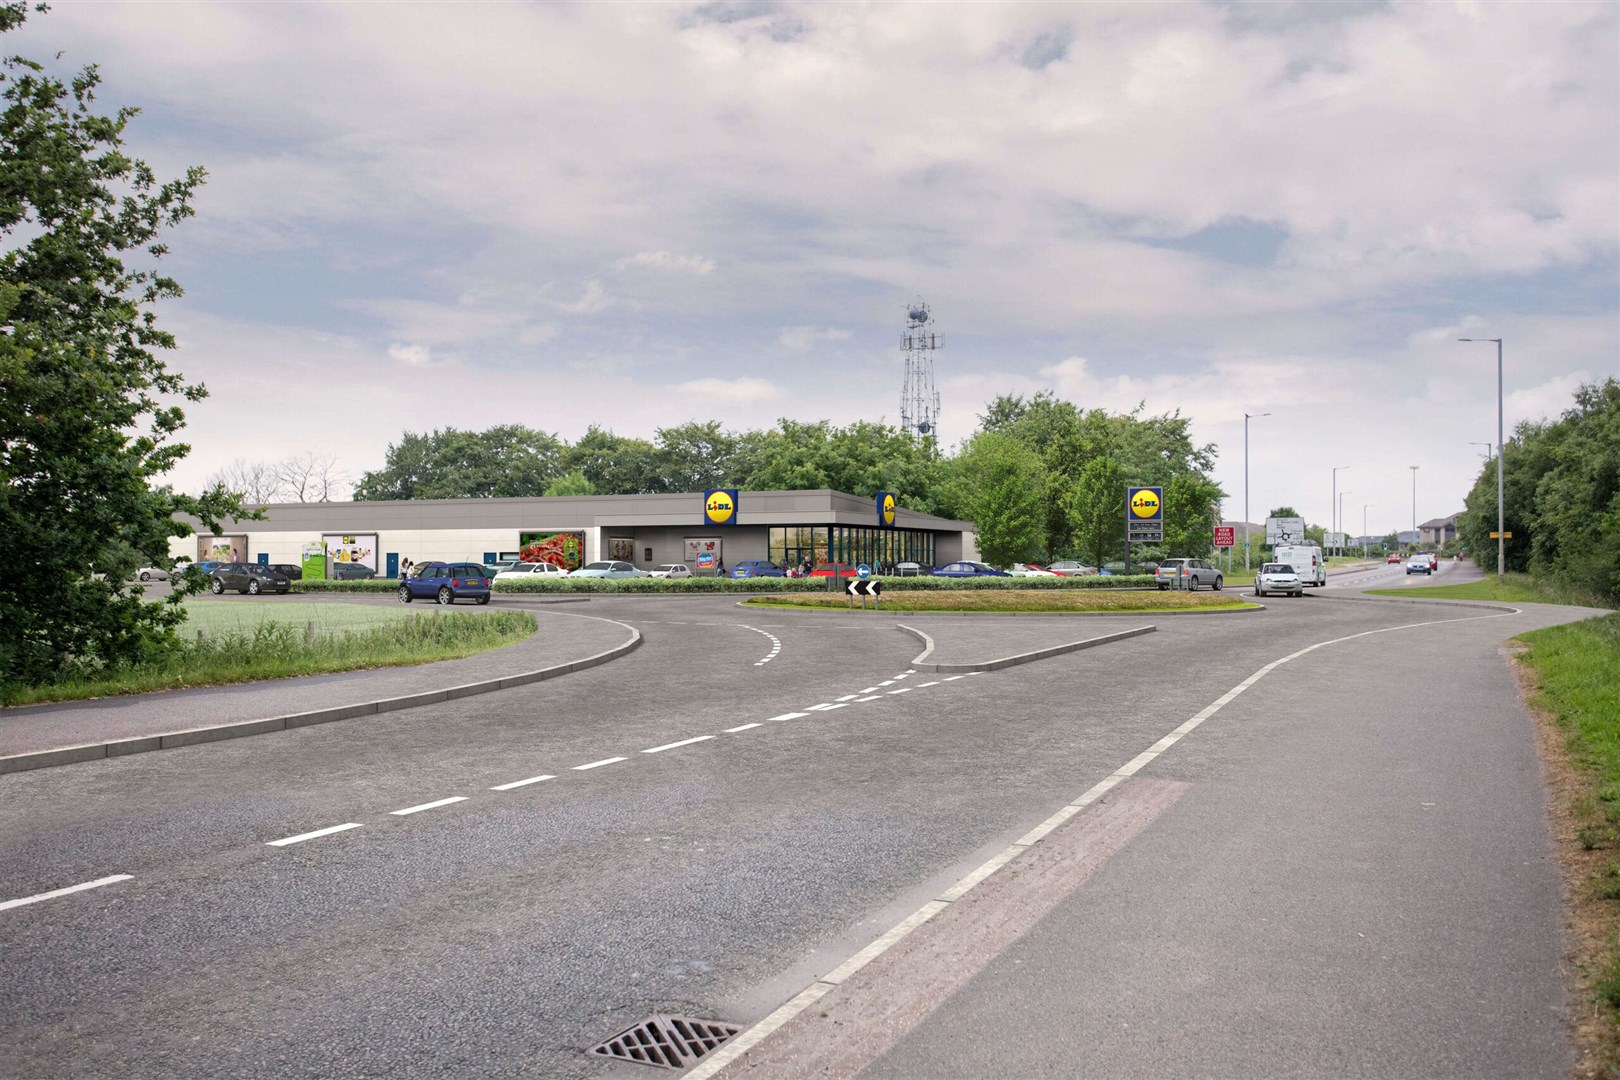 Lidl is carrying out a community consultation for plans to build a new supermarket near Inshes roundabout.